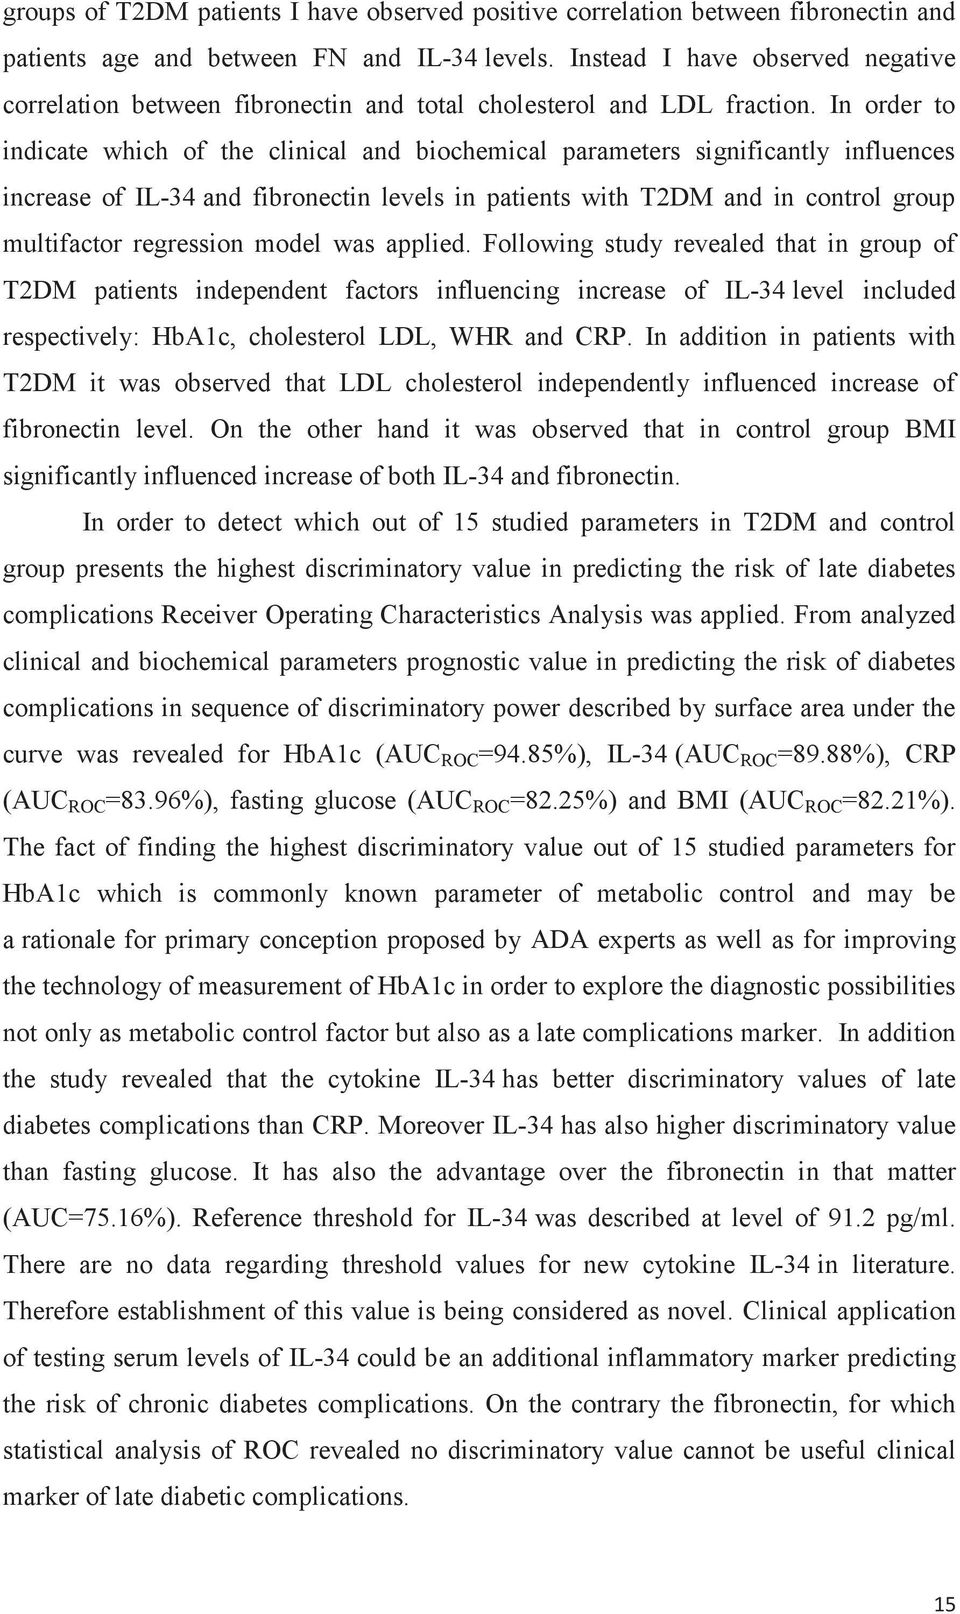 In order to indicate which of the clinical and biochemical parameters significantly influences increase of IL-34 and fibronectin levels in patients with T2DM and in control group multifactor